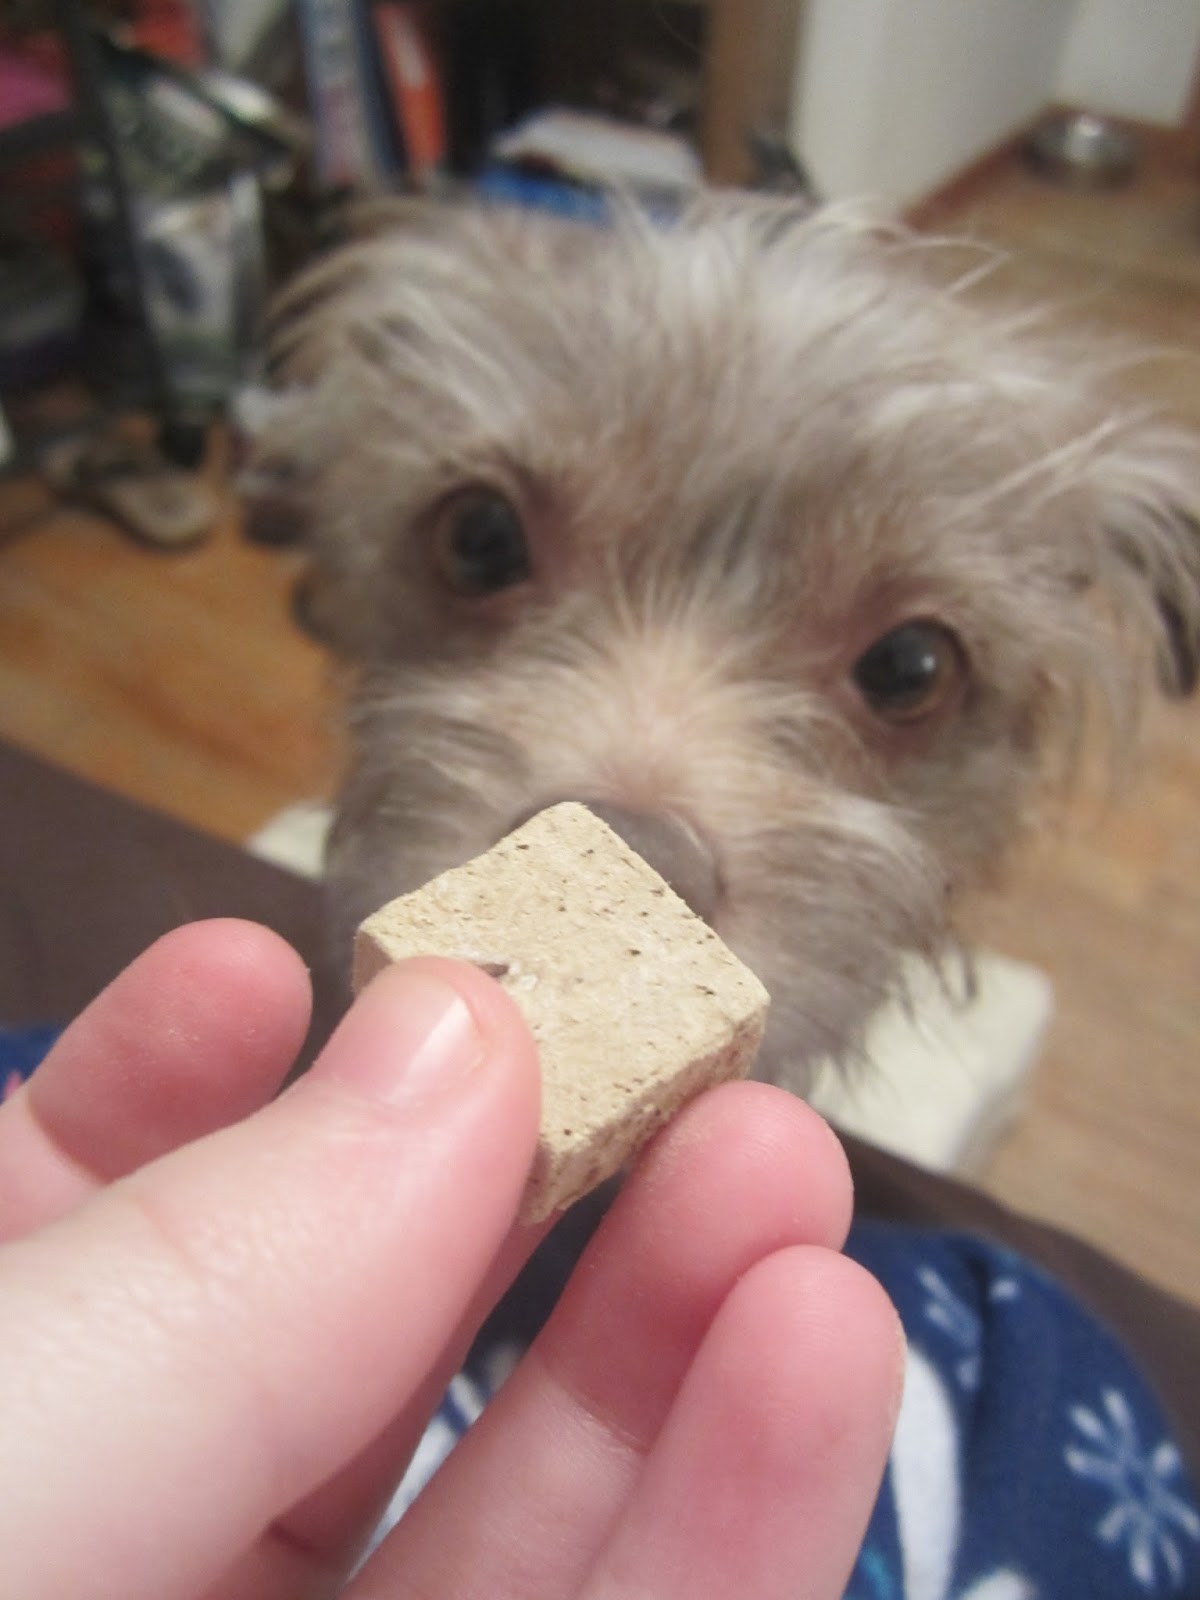 Bailey sniffing the dog treat